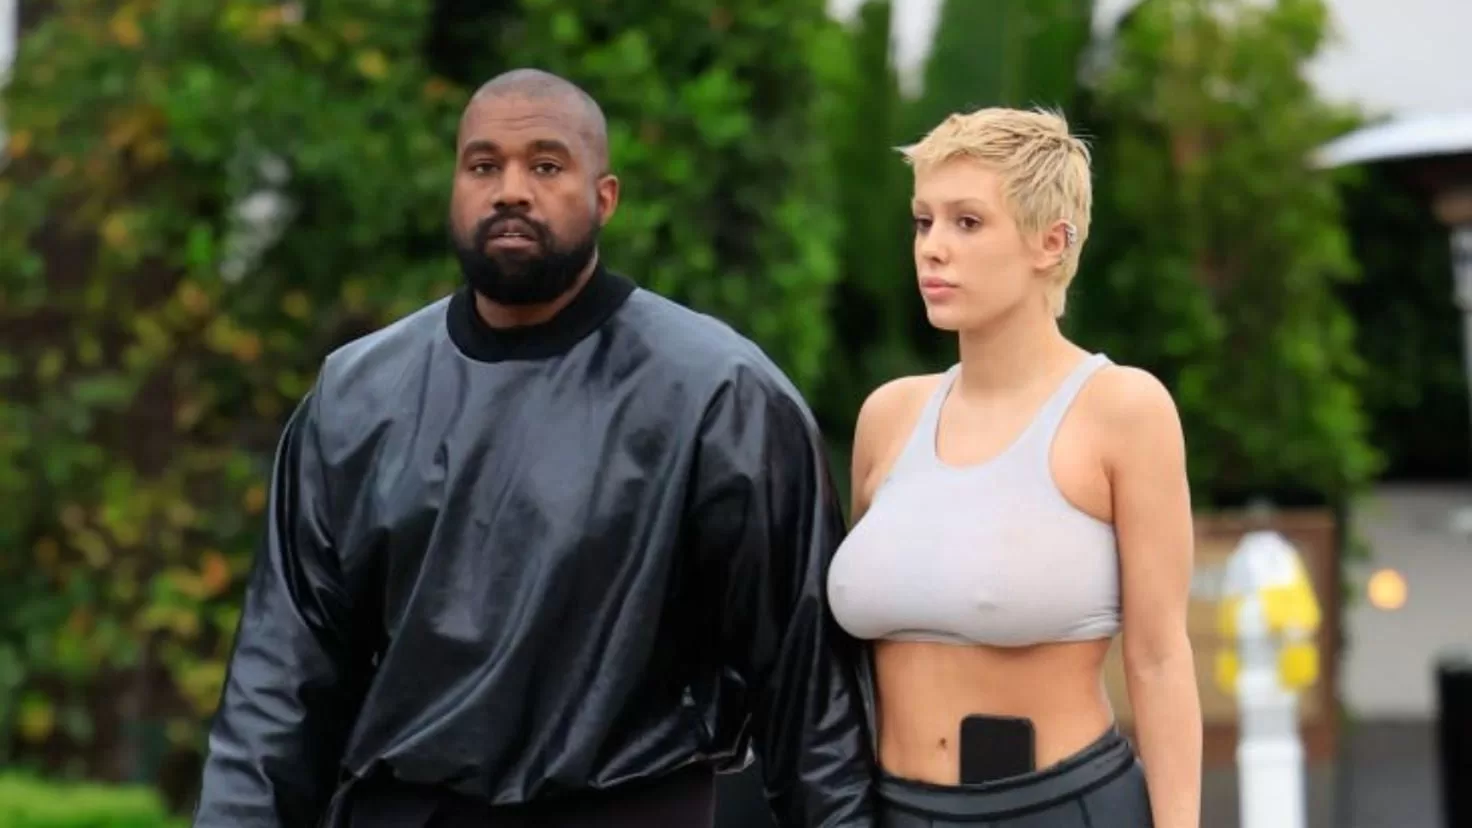 Kanye West, criticized for uploading almost naked photos of his wife, Bianca Censori
